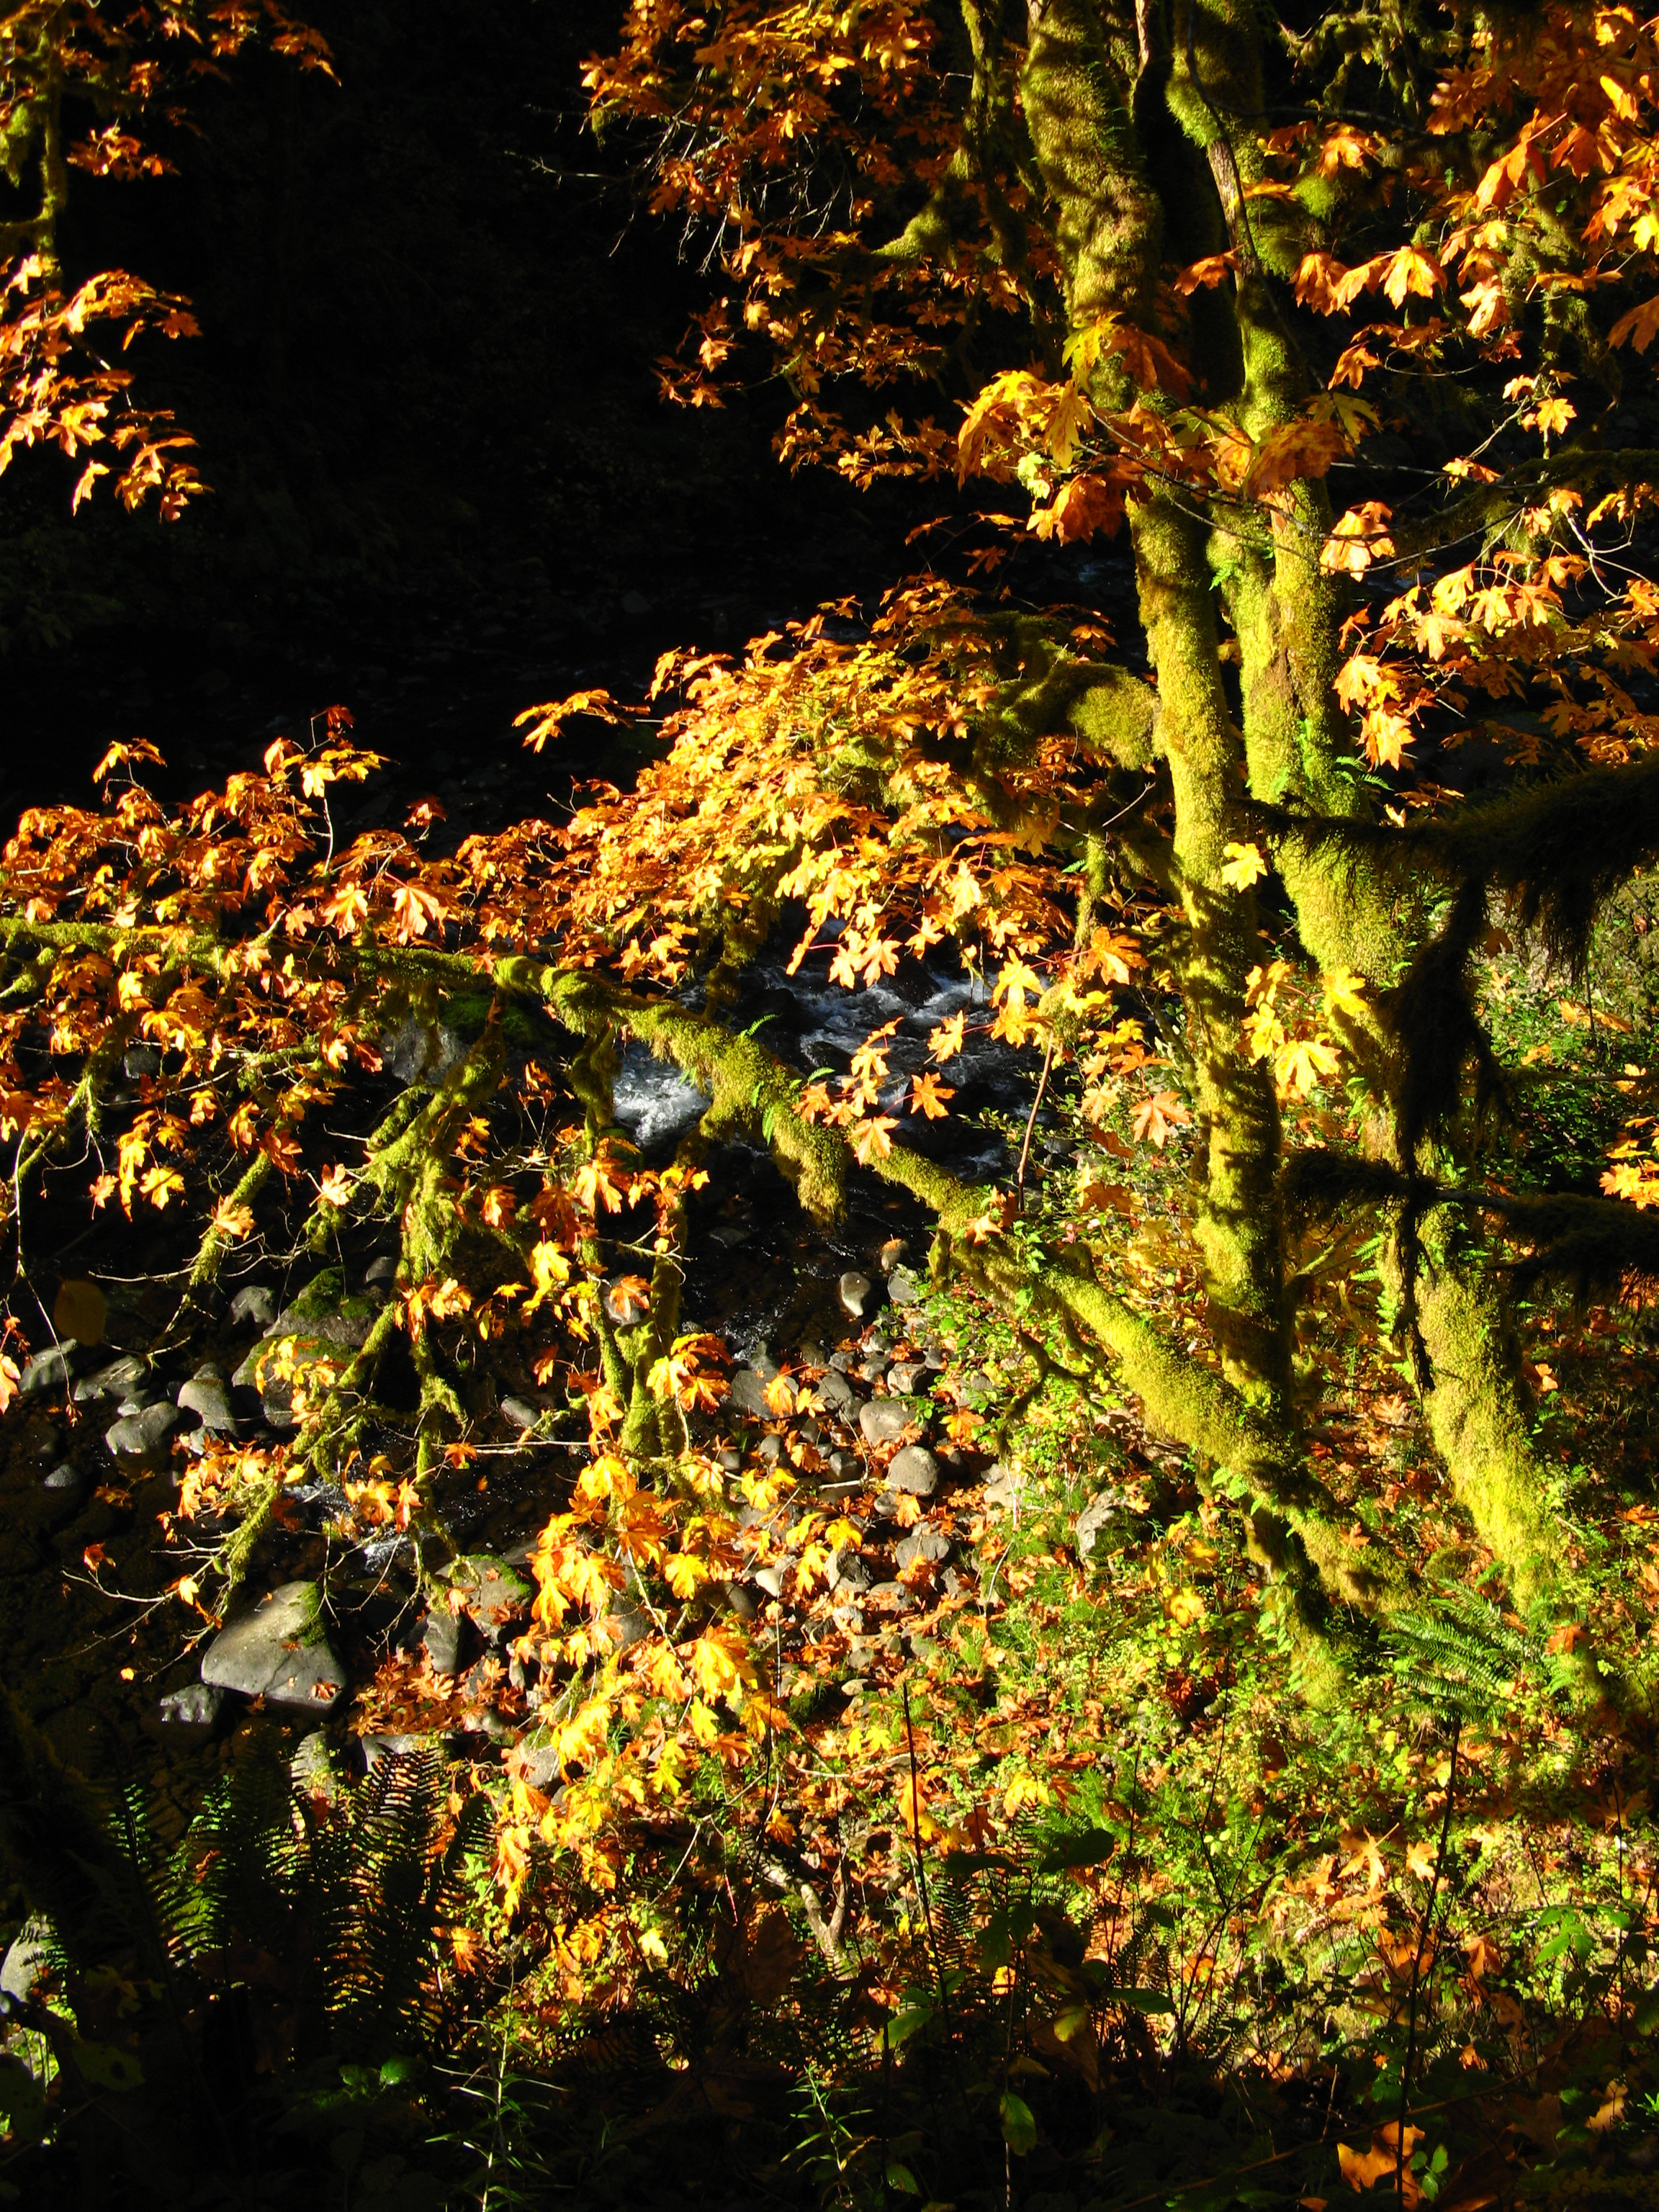 Stream and Tree Moss and Leaves